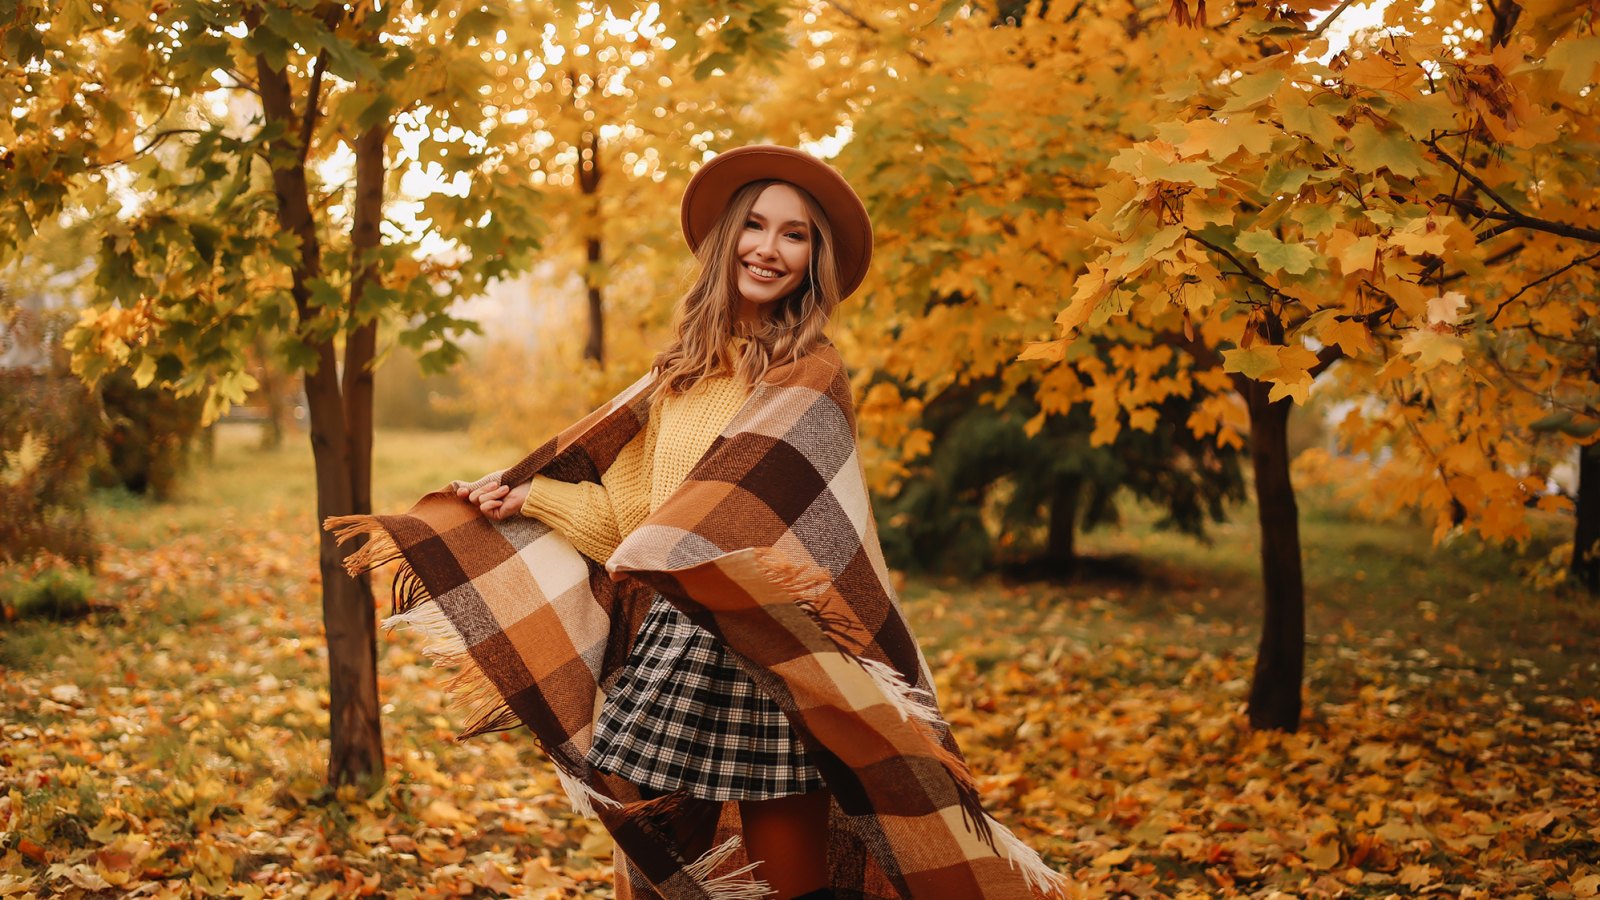 The 50 Best Fall Fashion Finds You Can Get From  For Under $50  Autumn  fashion women fall outfits, Autumn fashion women, Cute fall outfits